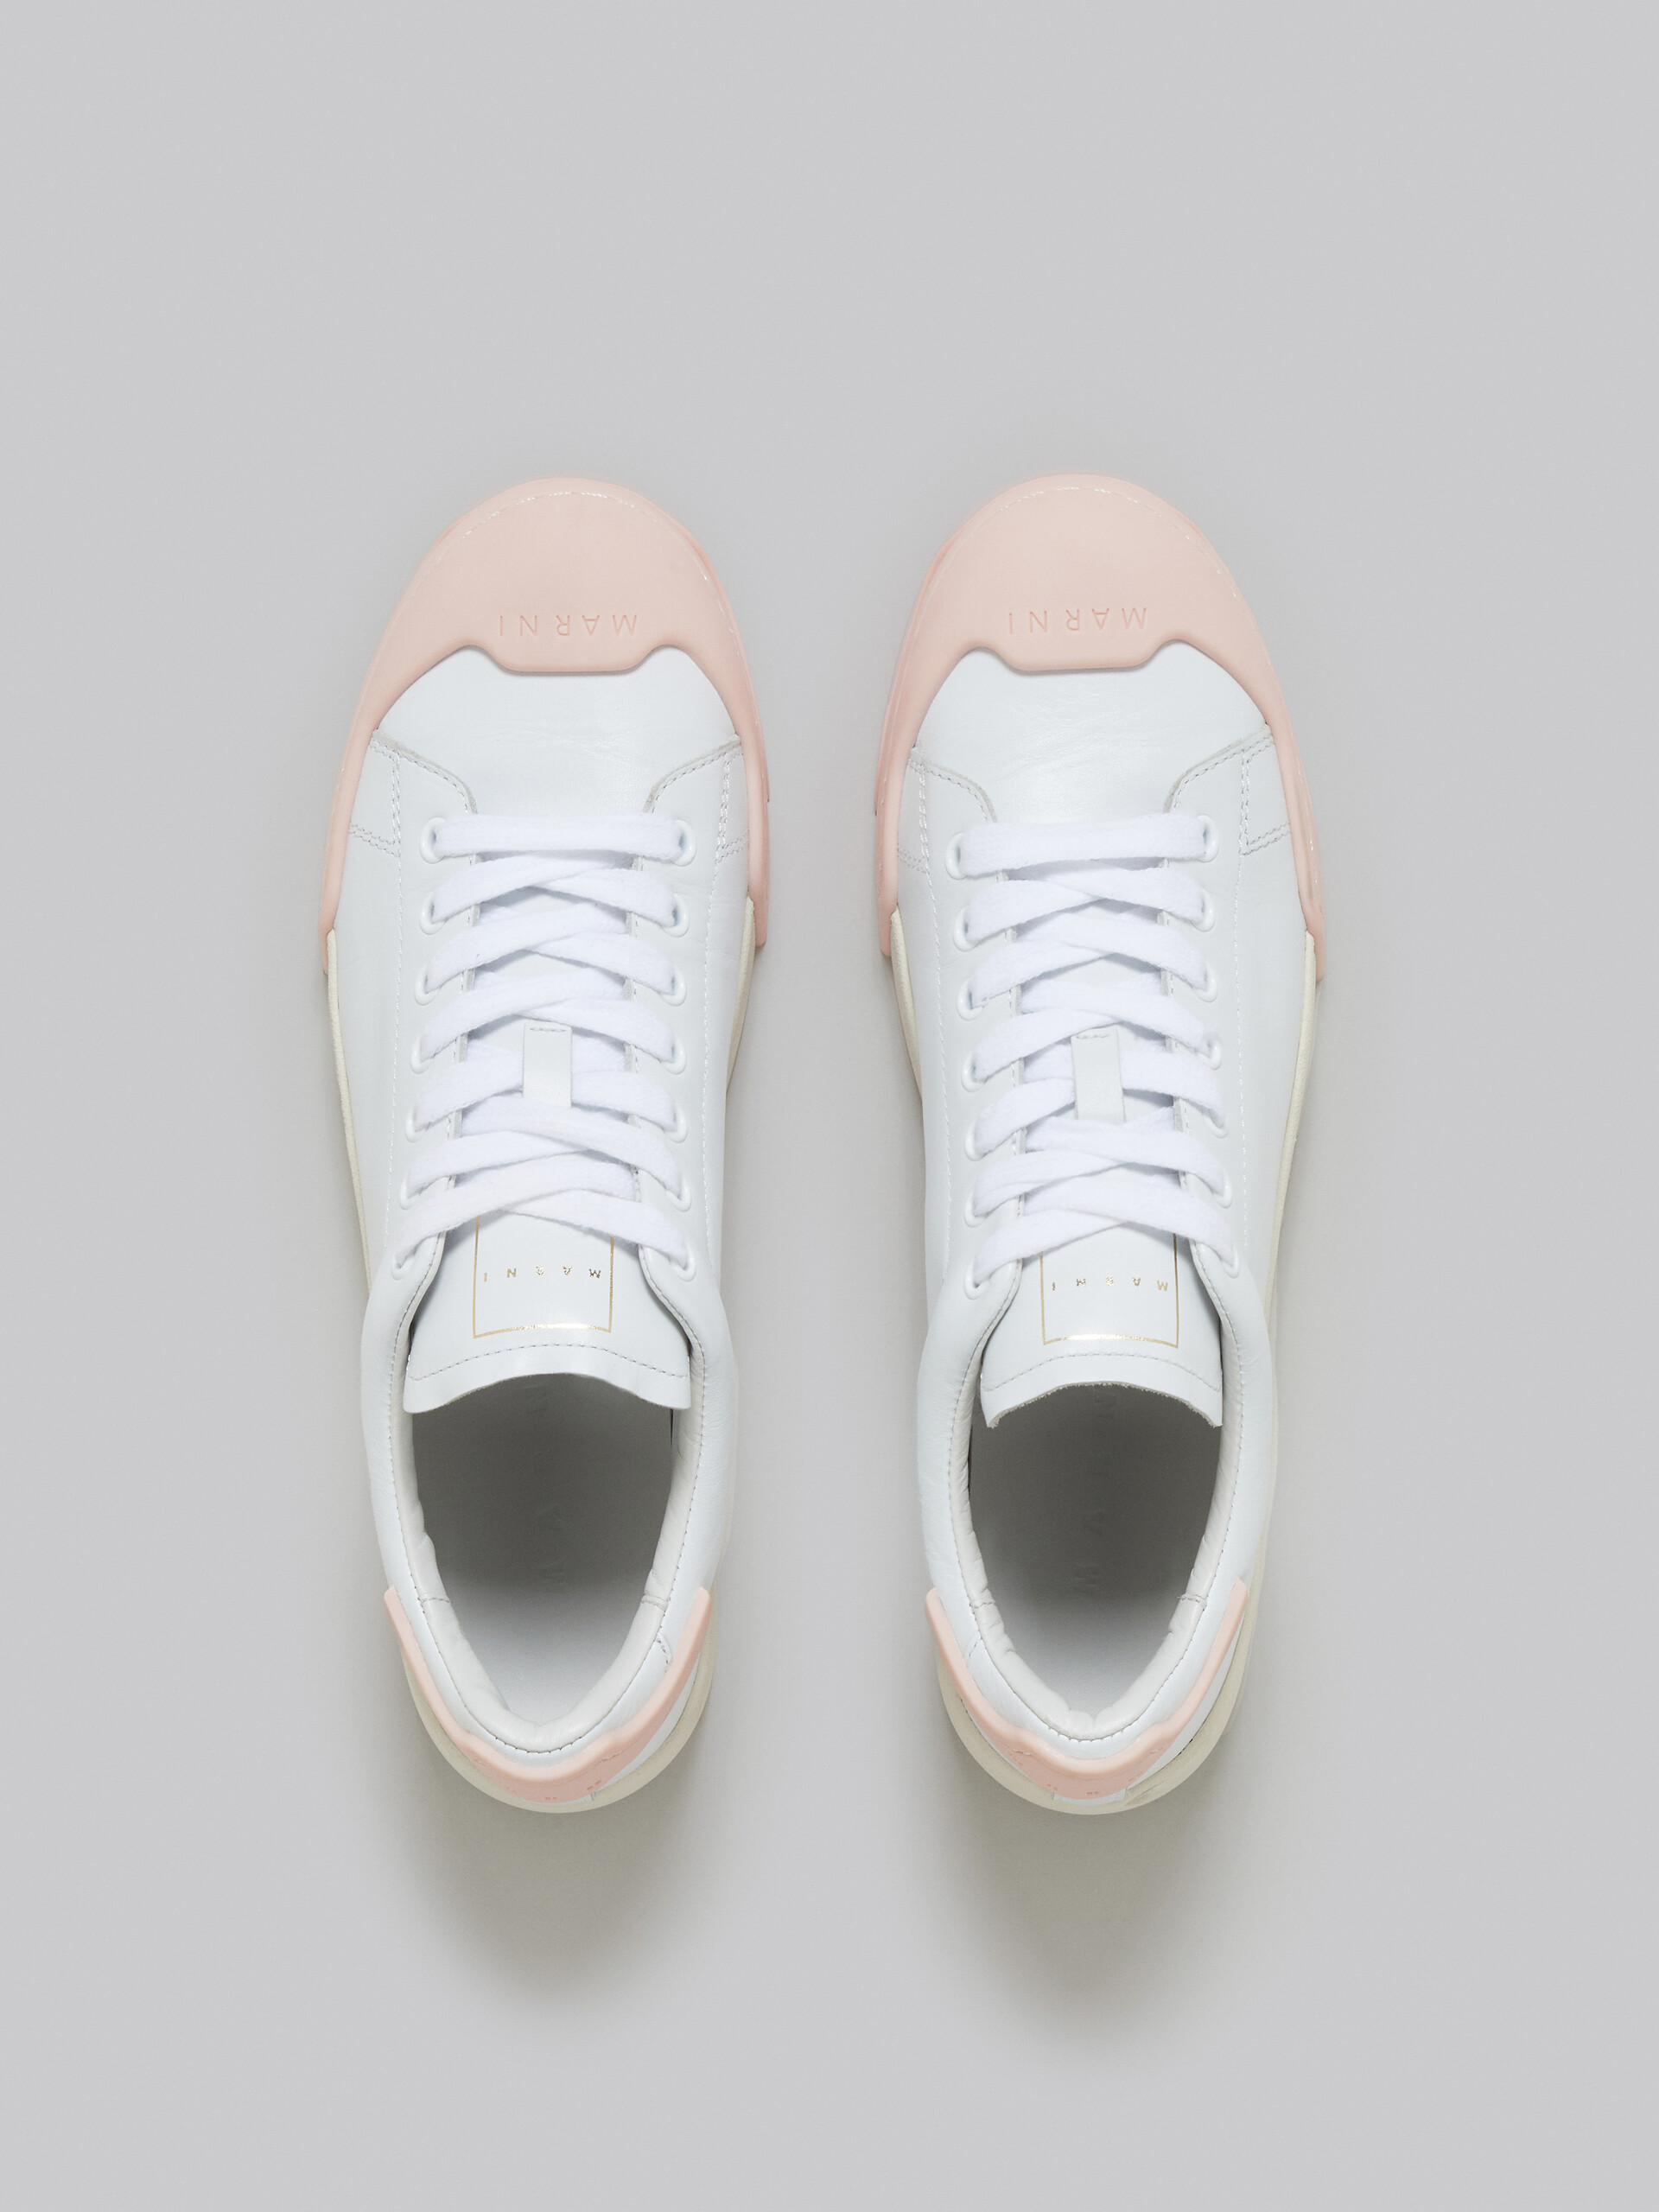 Dada Bumper sneaker in white and pink leather - Sneakers - Image 4